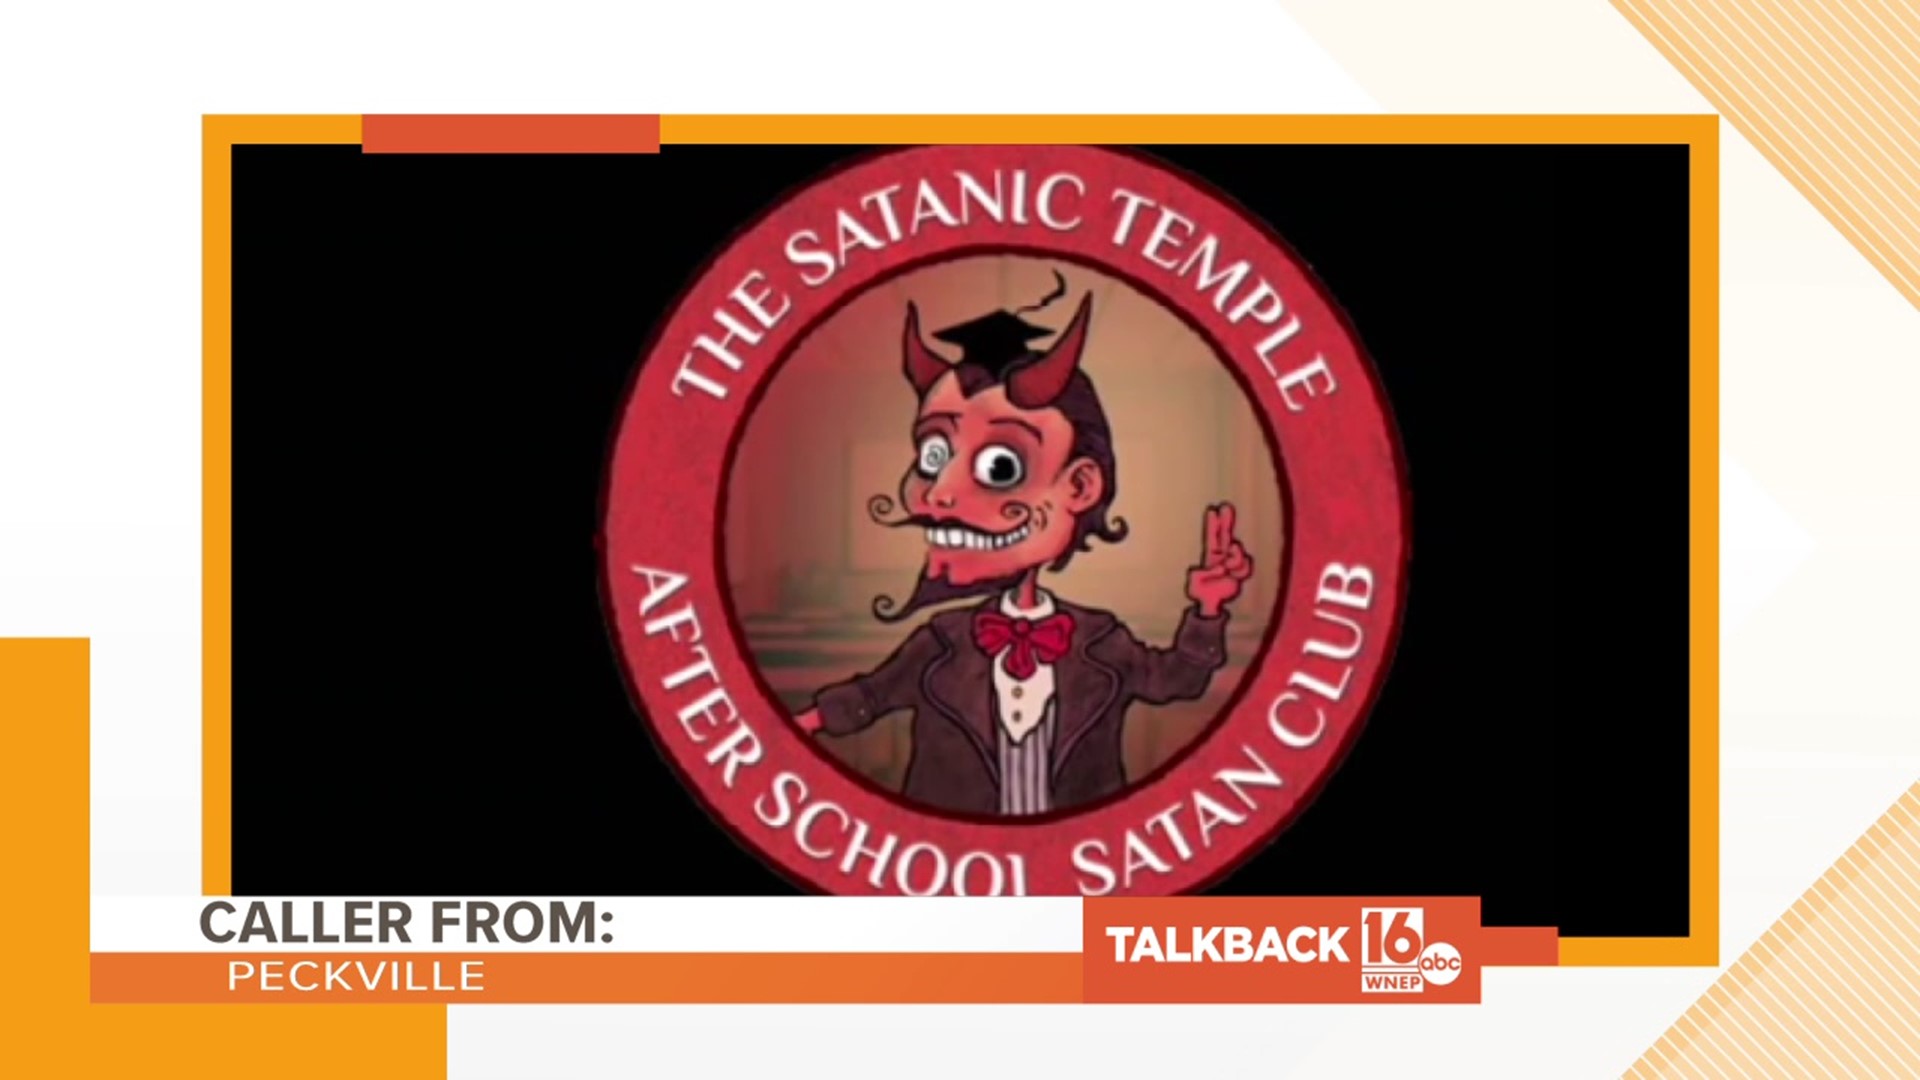 Callers feel that a proposed Satan club in a Pennsylvania school is not a good idea.